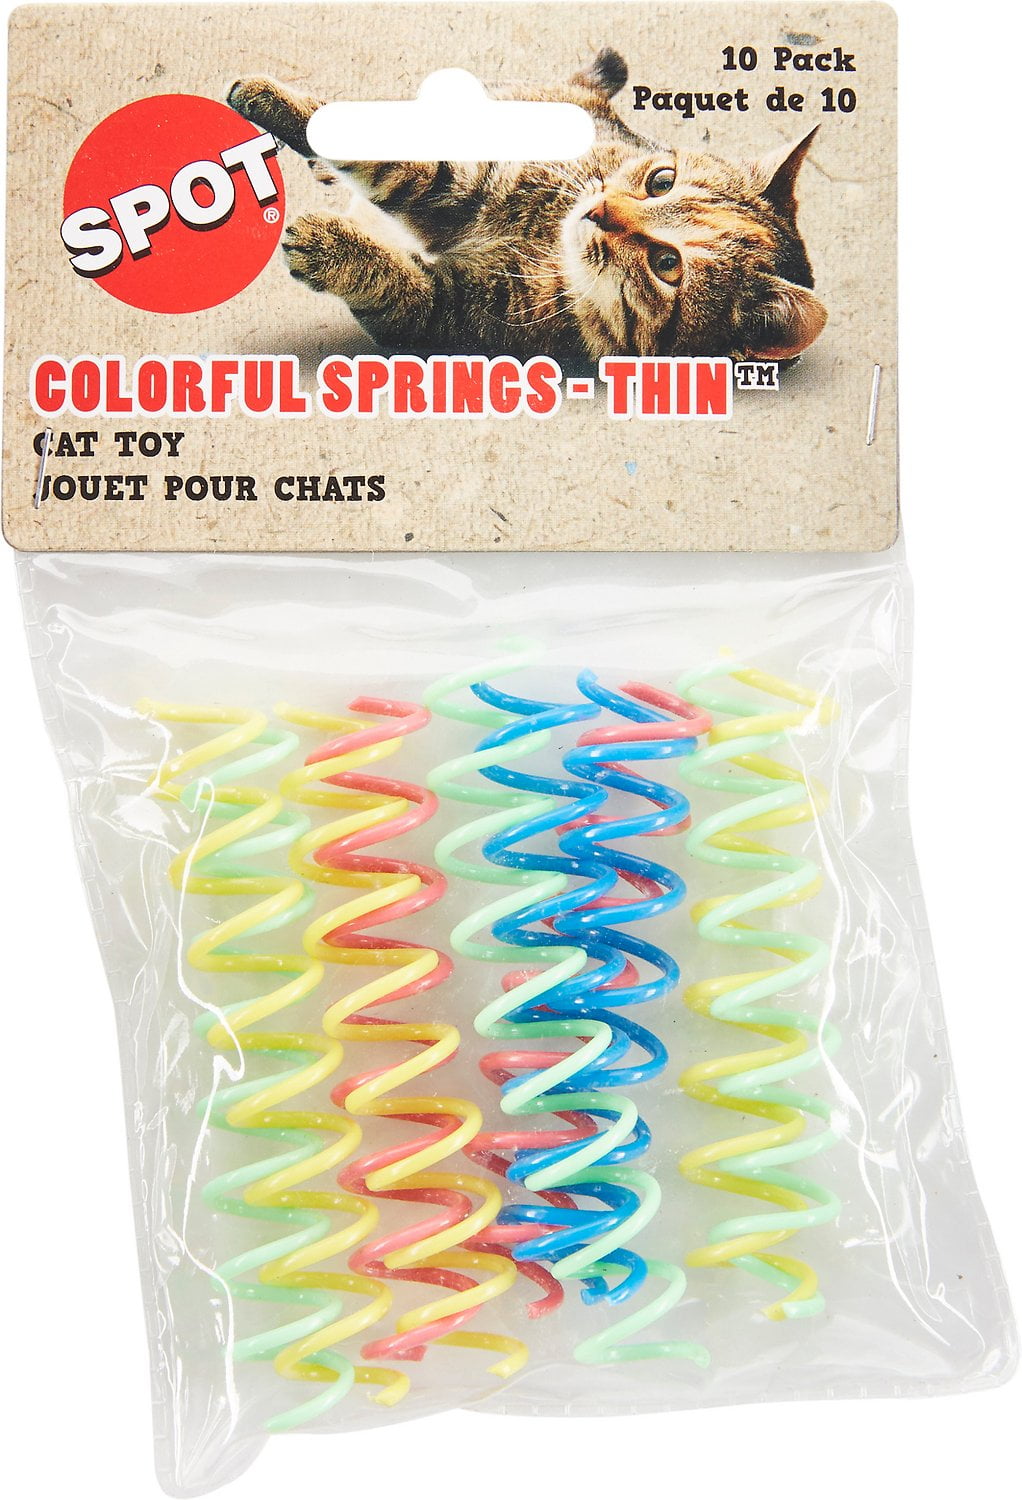 Ethical Thin Colorful Springs Cat Toy 10-Pack 